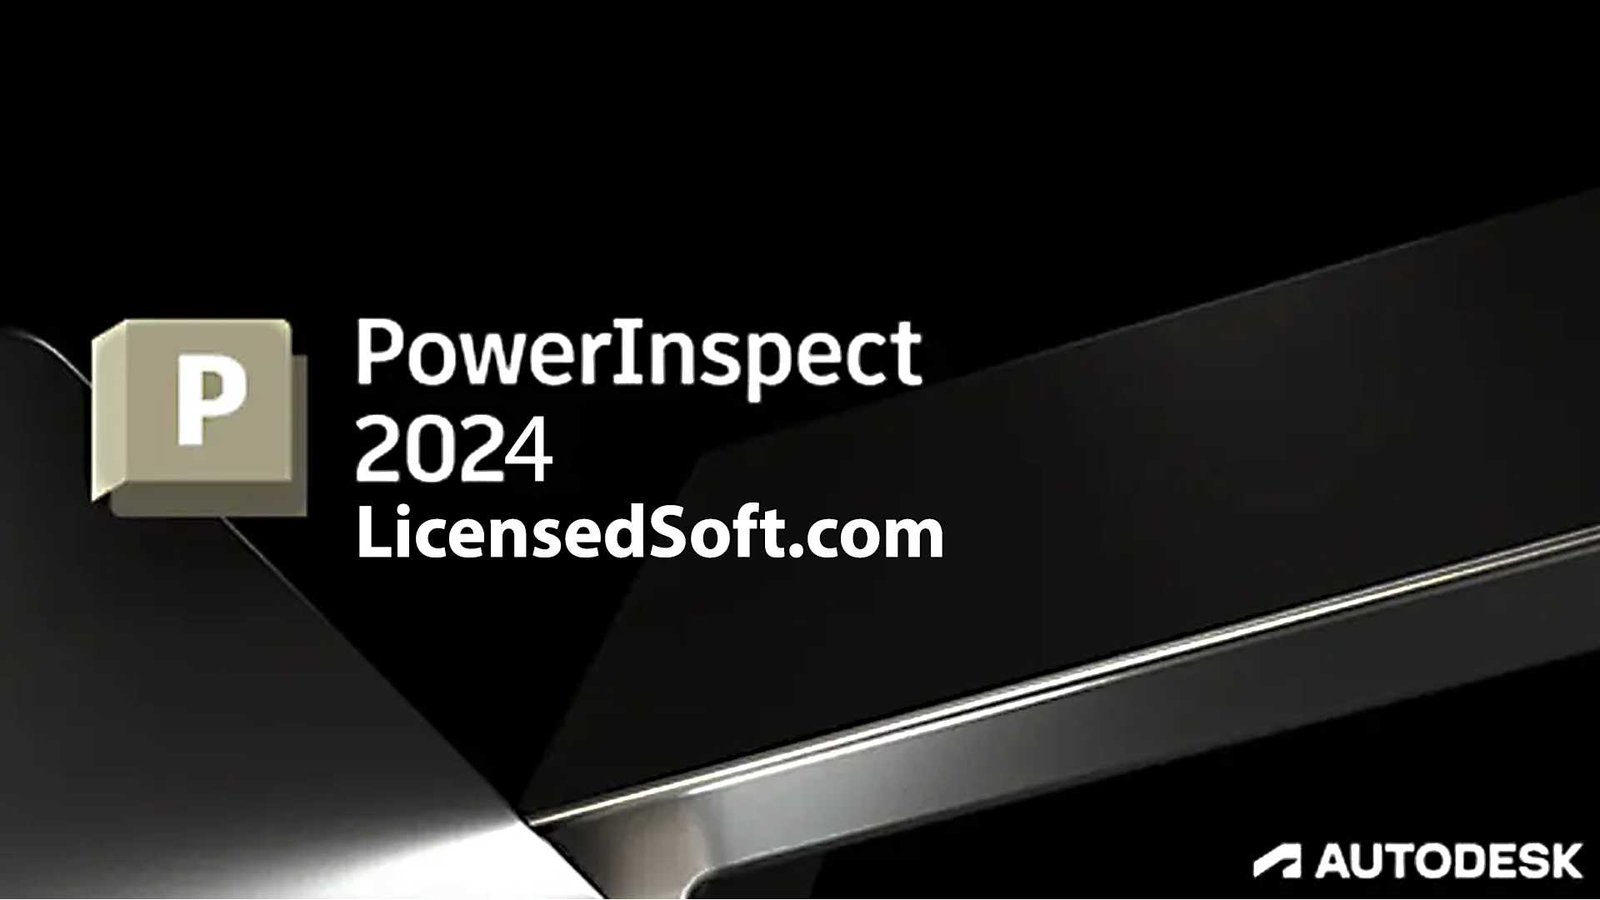 Autodesk PowerInspect Ultimate 2024 Cover Image By LicensedSoft